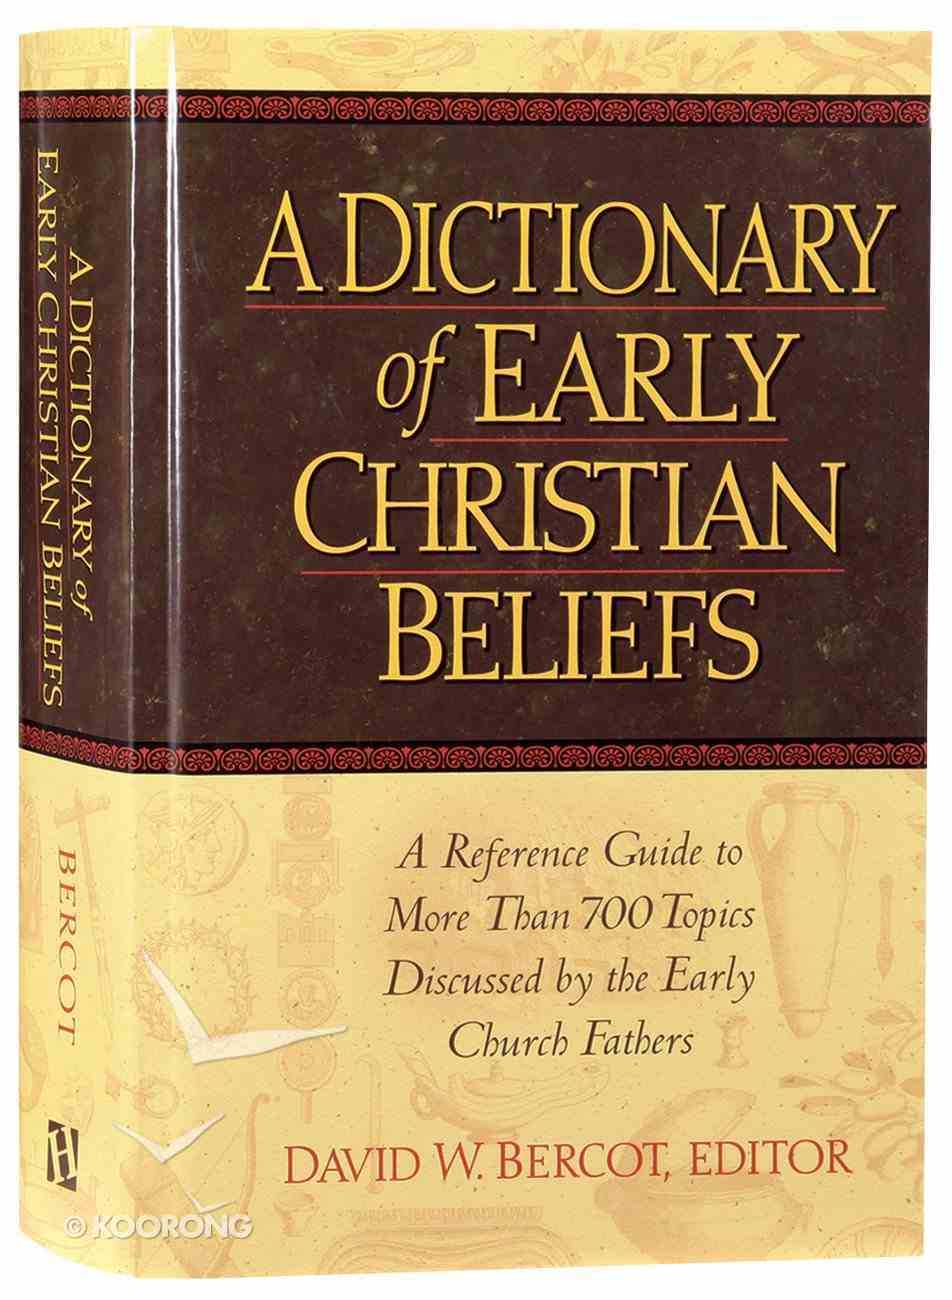 A Dictionary of Early Christian Beliefs: A Reference Guide to More Than 700 Topics Discuseed By the Early Church Fathers Hardback